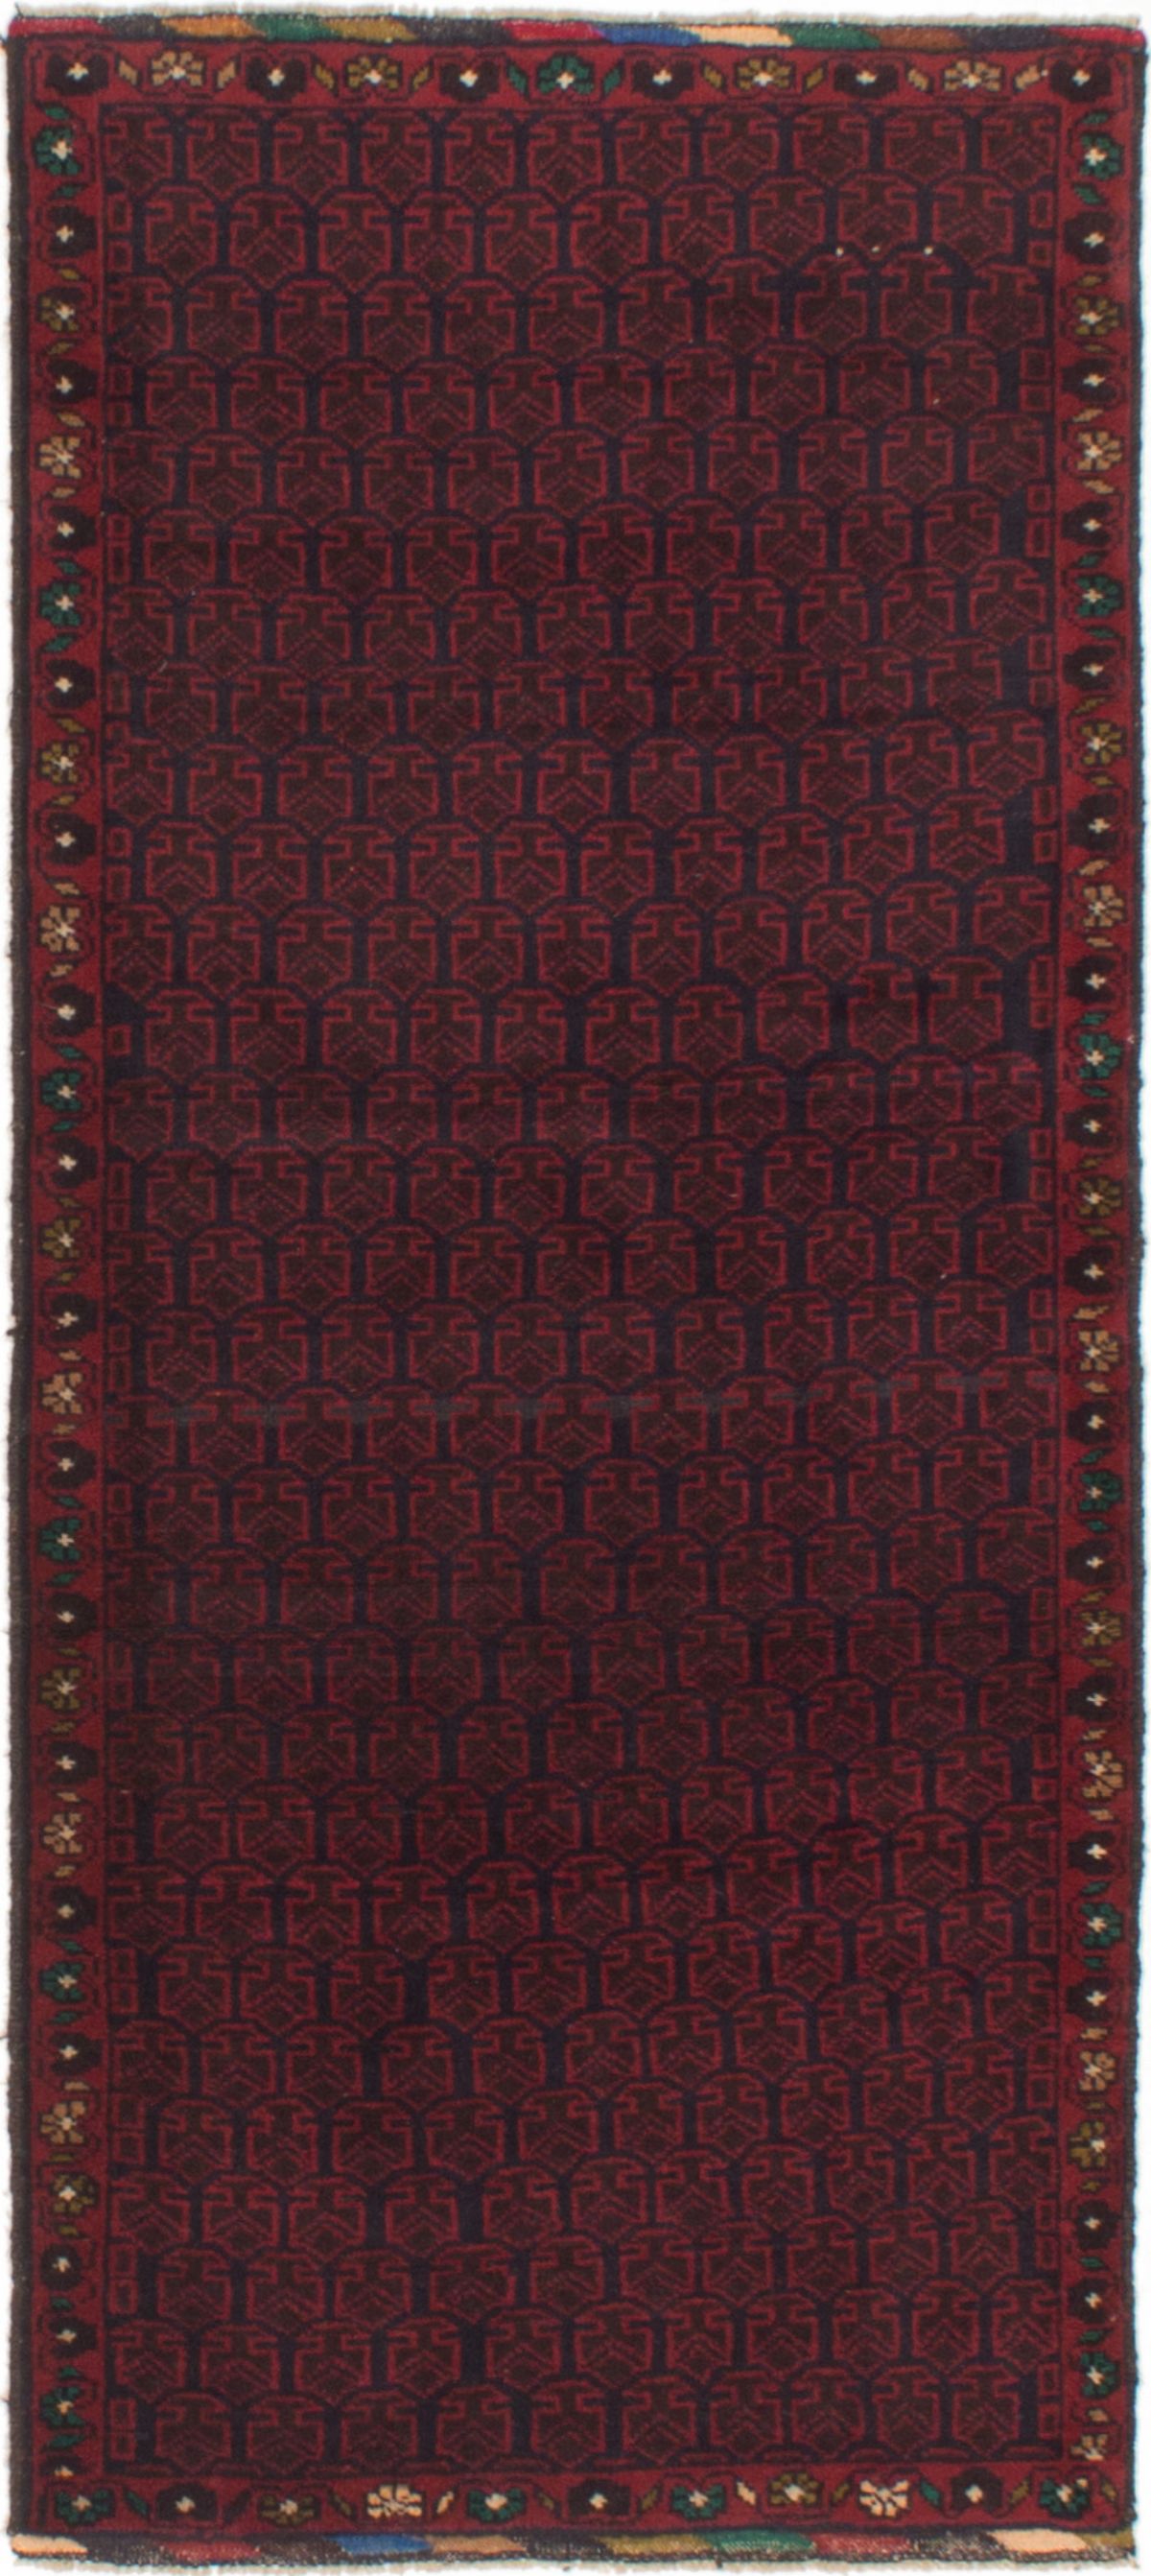 Hand-knotted Teimani Red Wool Rug 2'11" x 6'4" Size: 2'11" x 6'4"  